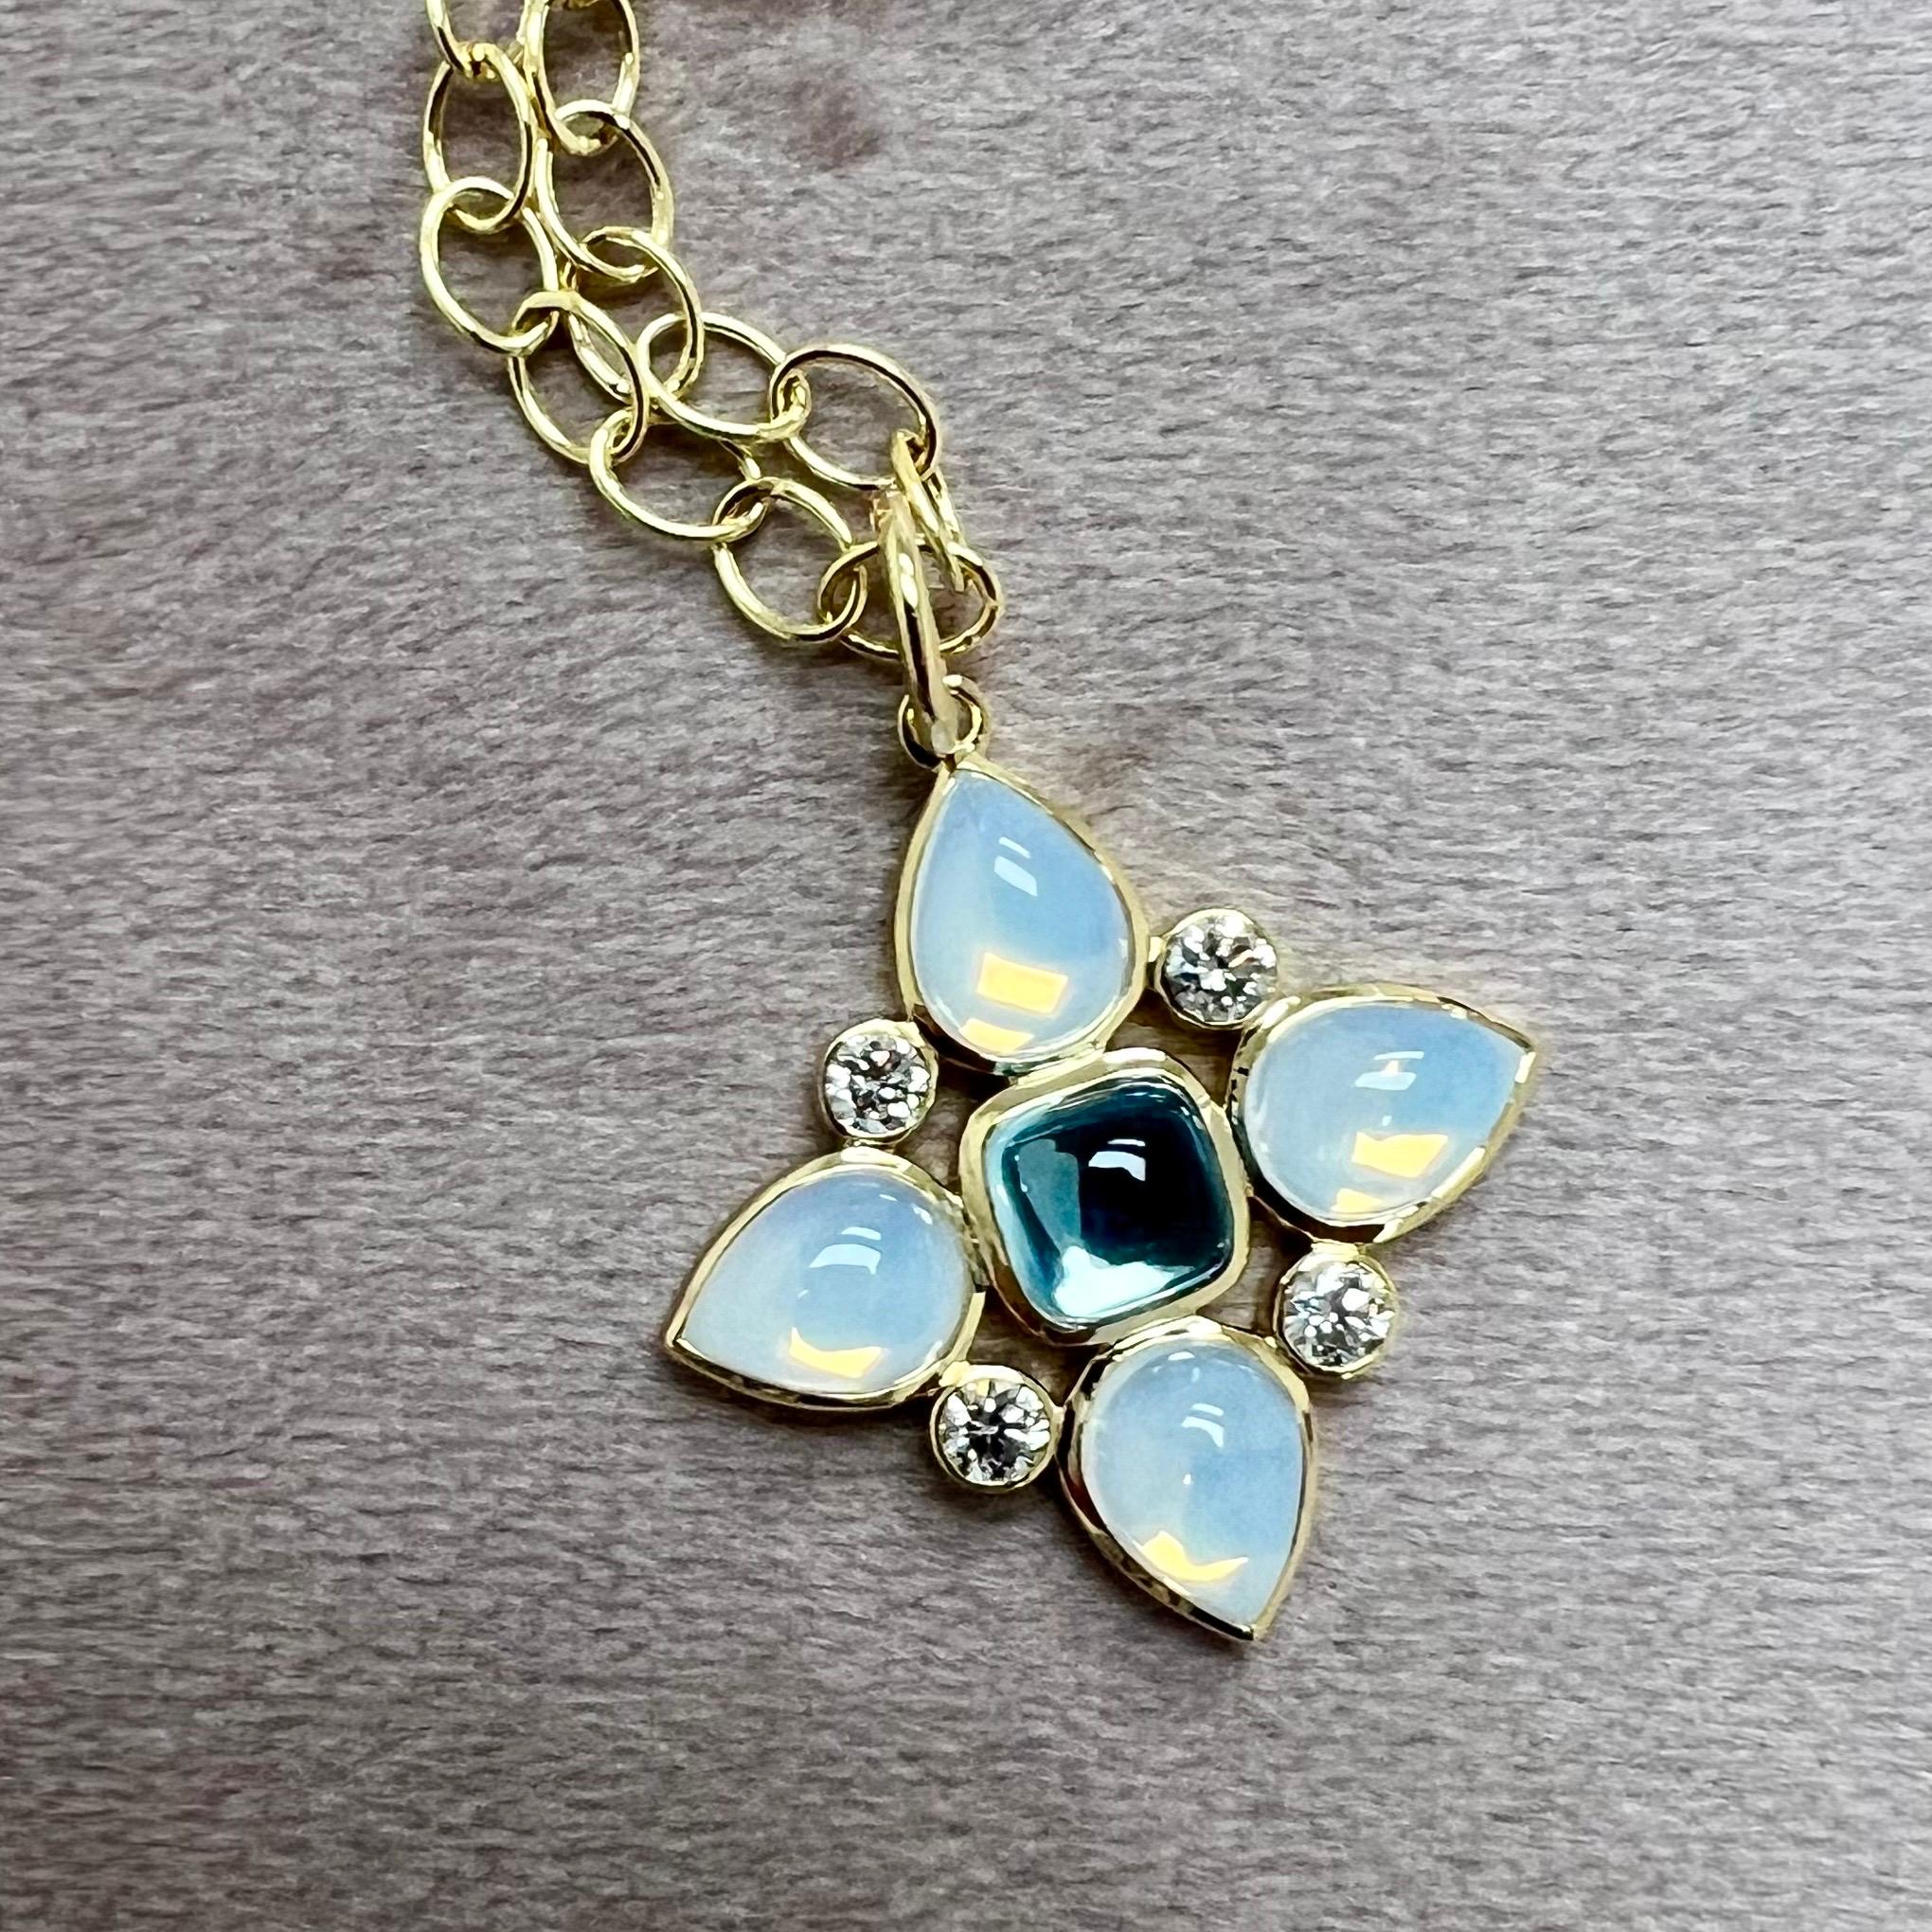 Created in 18 karat yellow gold
Blue Topaz 1.50 carats approx.
Moon Quartz 4.50 carats approx.
Diamonds 0.45 carat approx.
Chain sold separately

Enrobing 18 karat yellow gold, a blue topaz of 1.50 carats, moon quartz of 4.50 carats, and Diamonds of